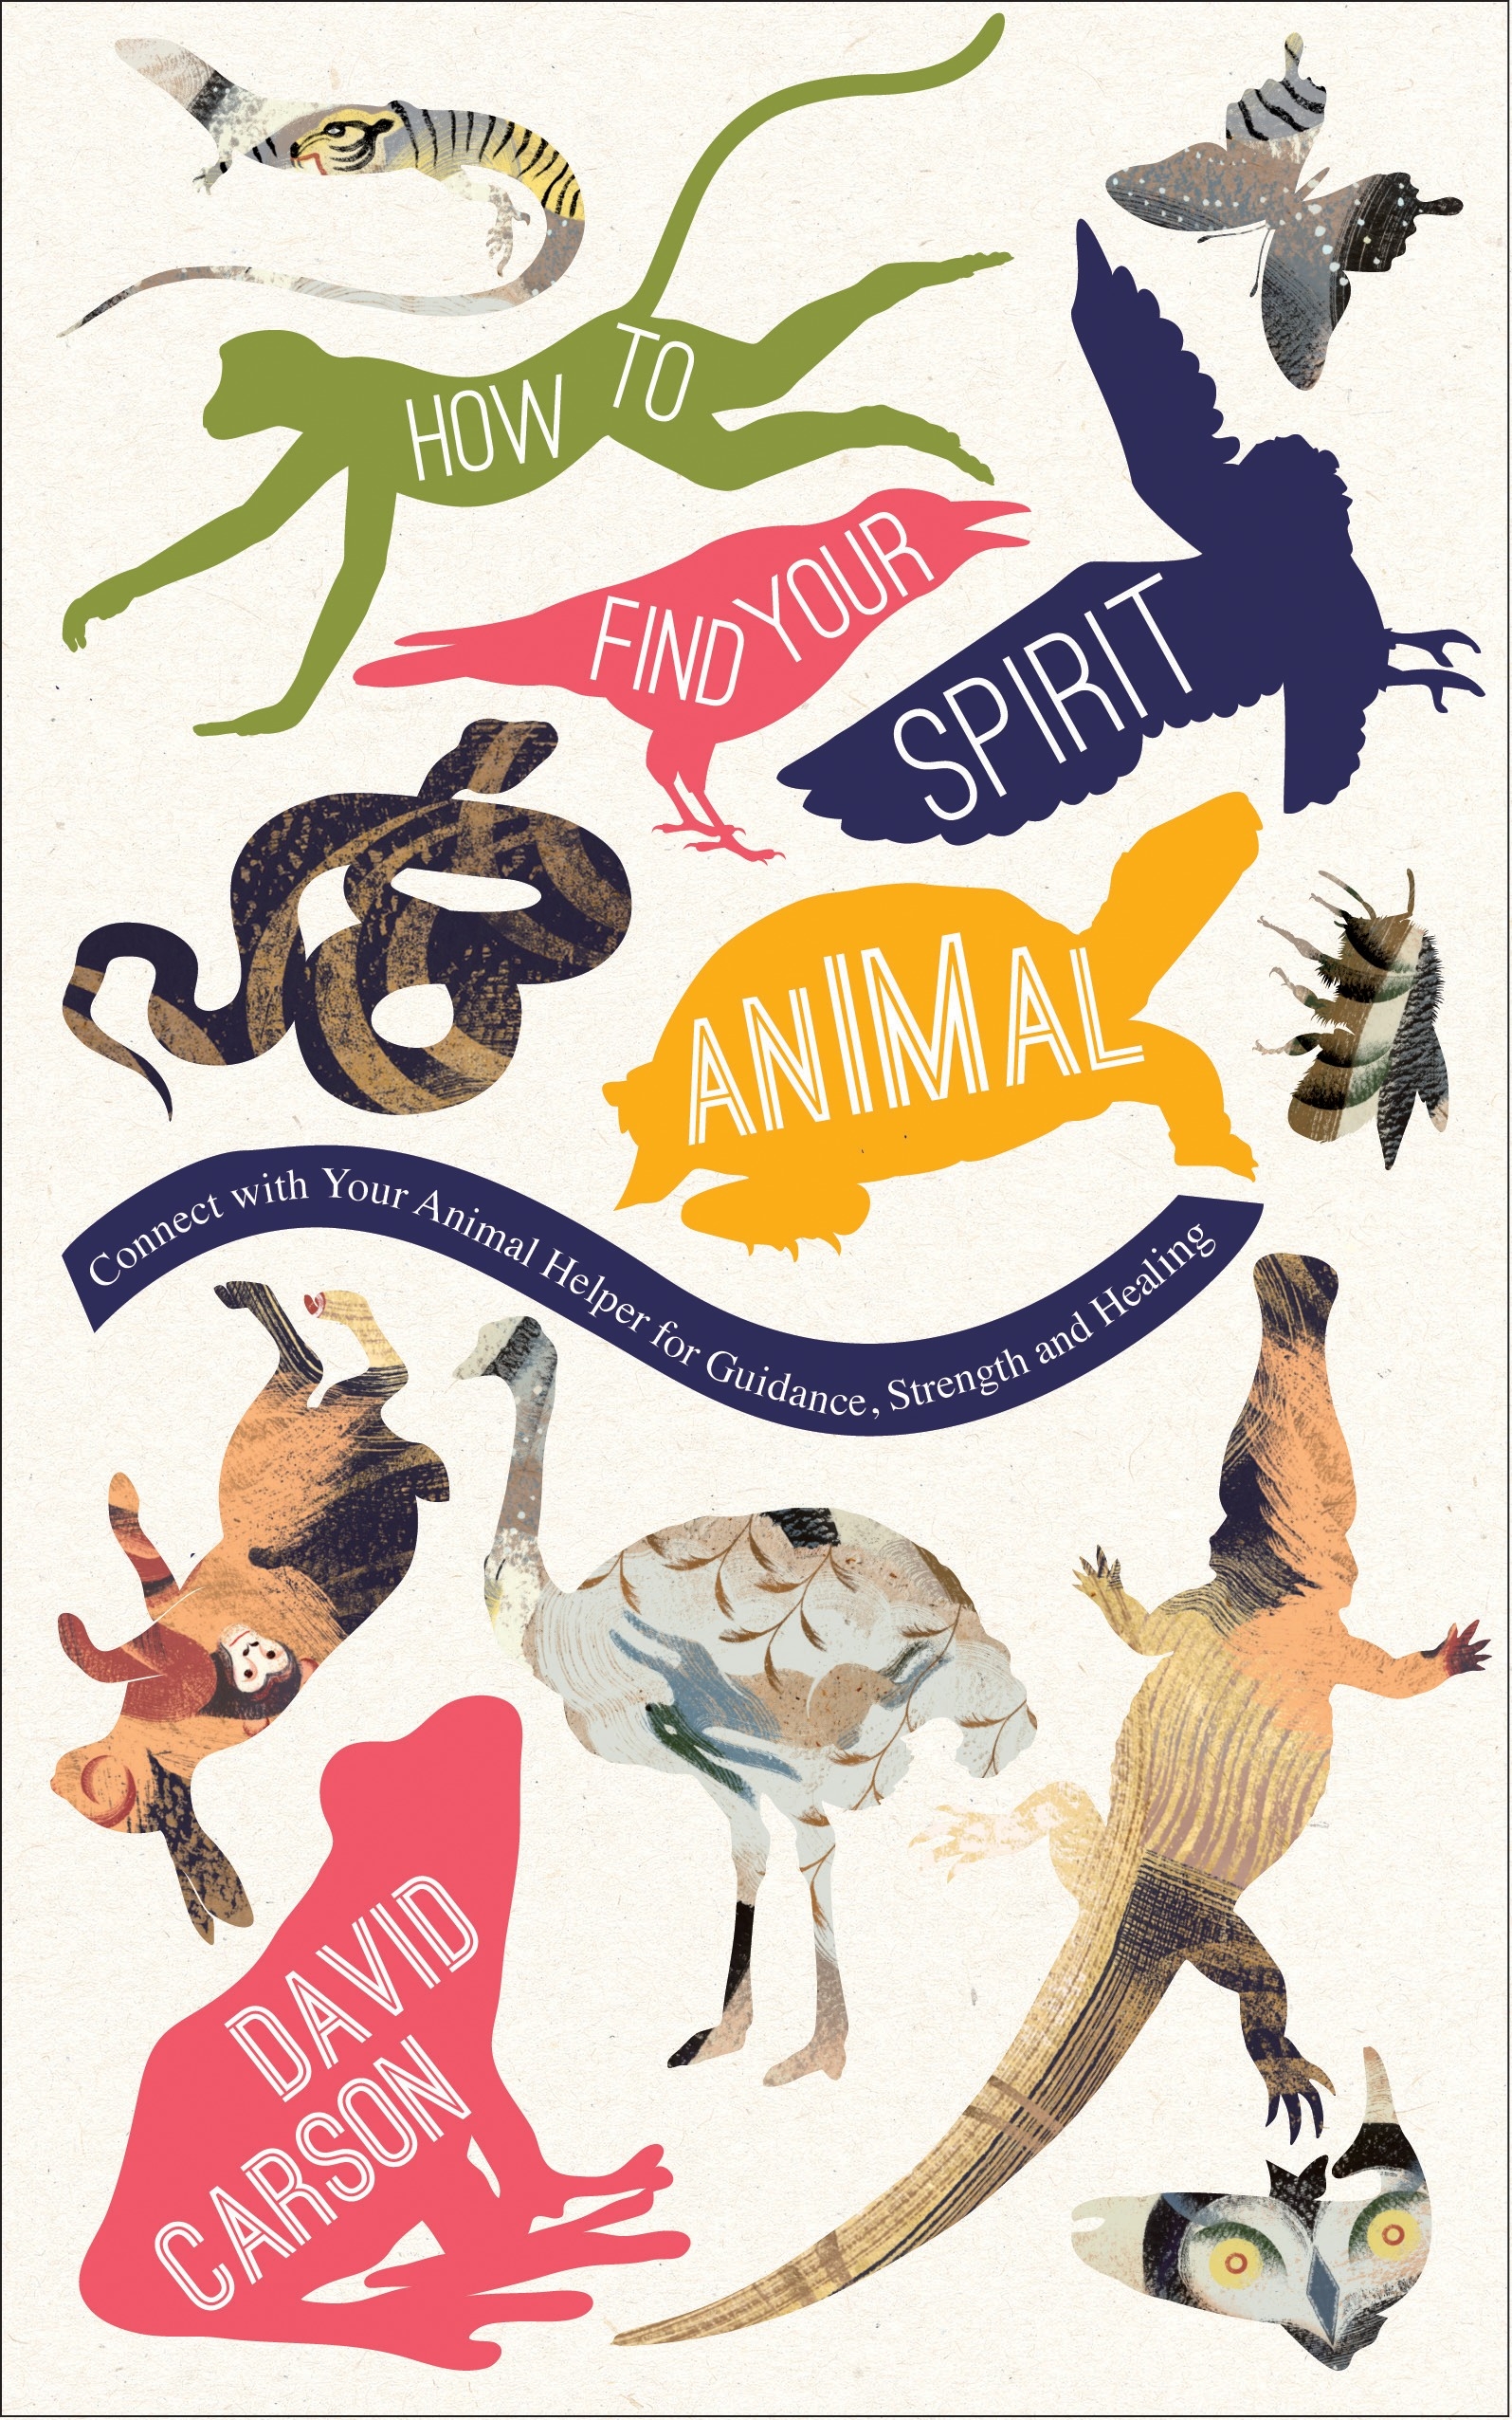 How to Find Your Spirit Animal by David Carson - Penguin Books Australia